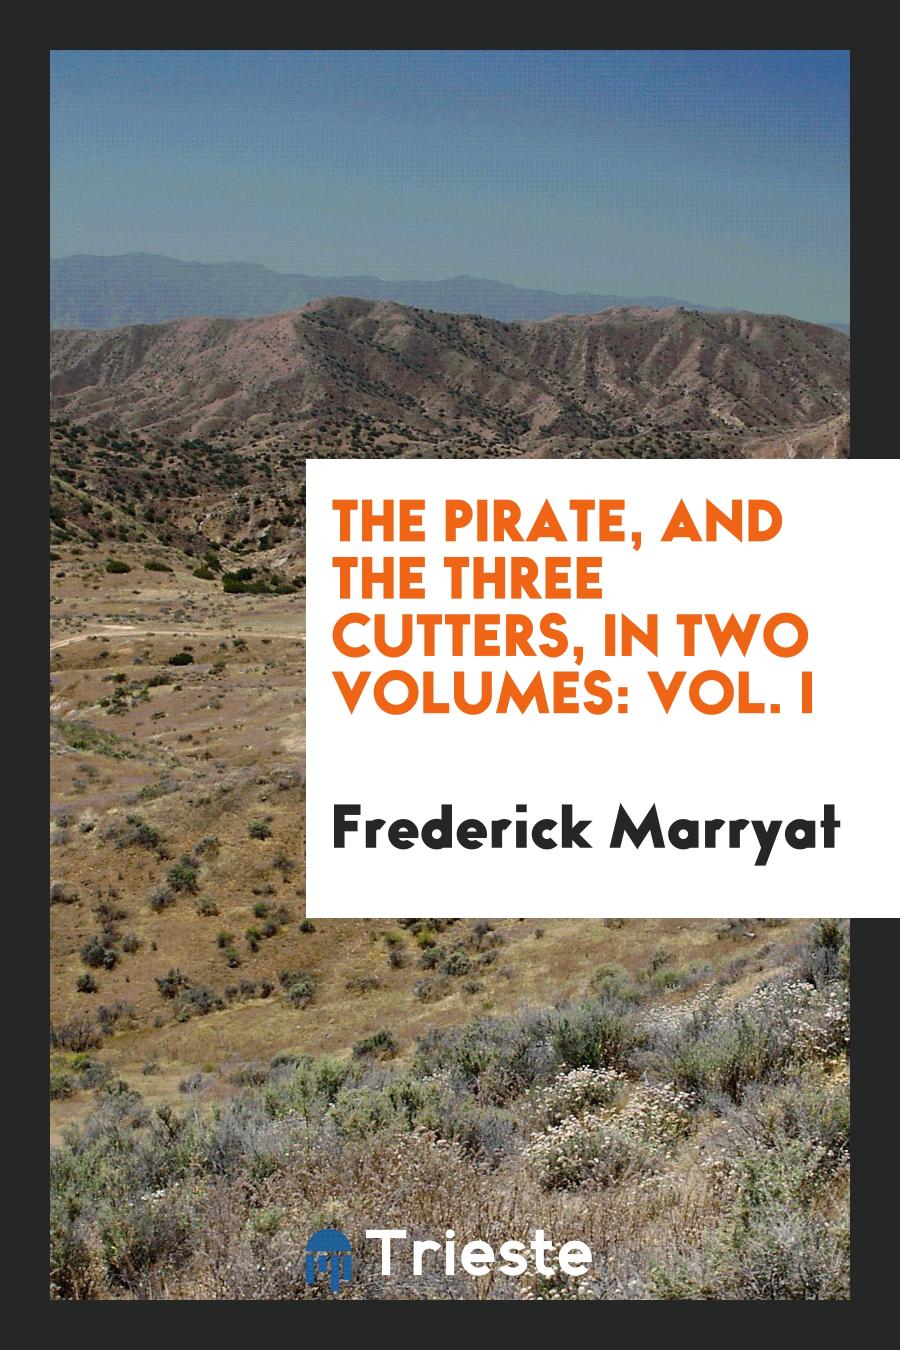 Frederick Marryat - The Pirate, and The Three Cutters, in Two Volumes: Vol. I